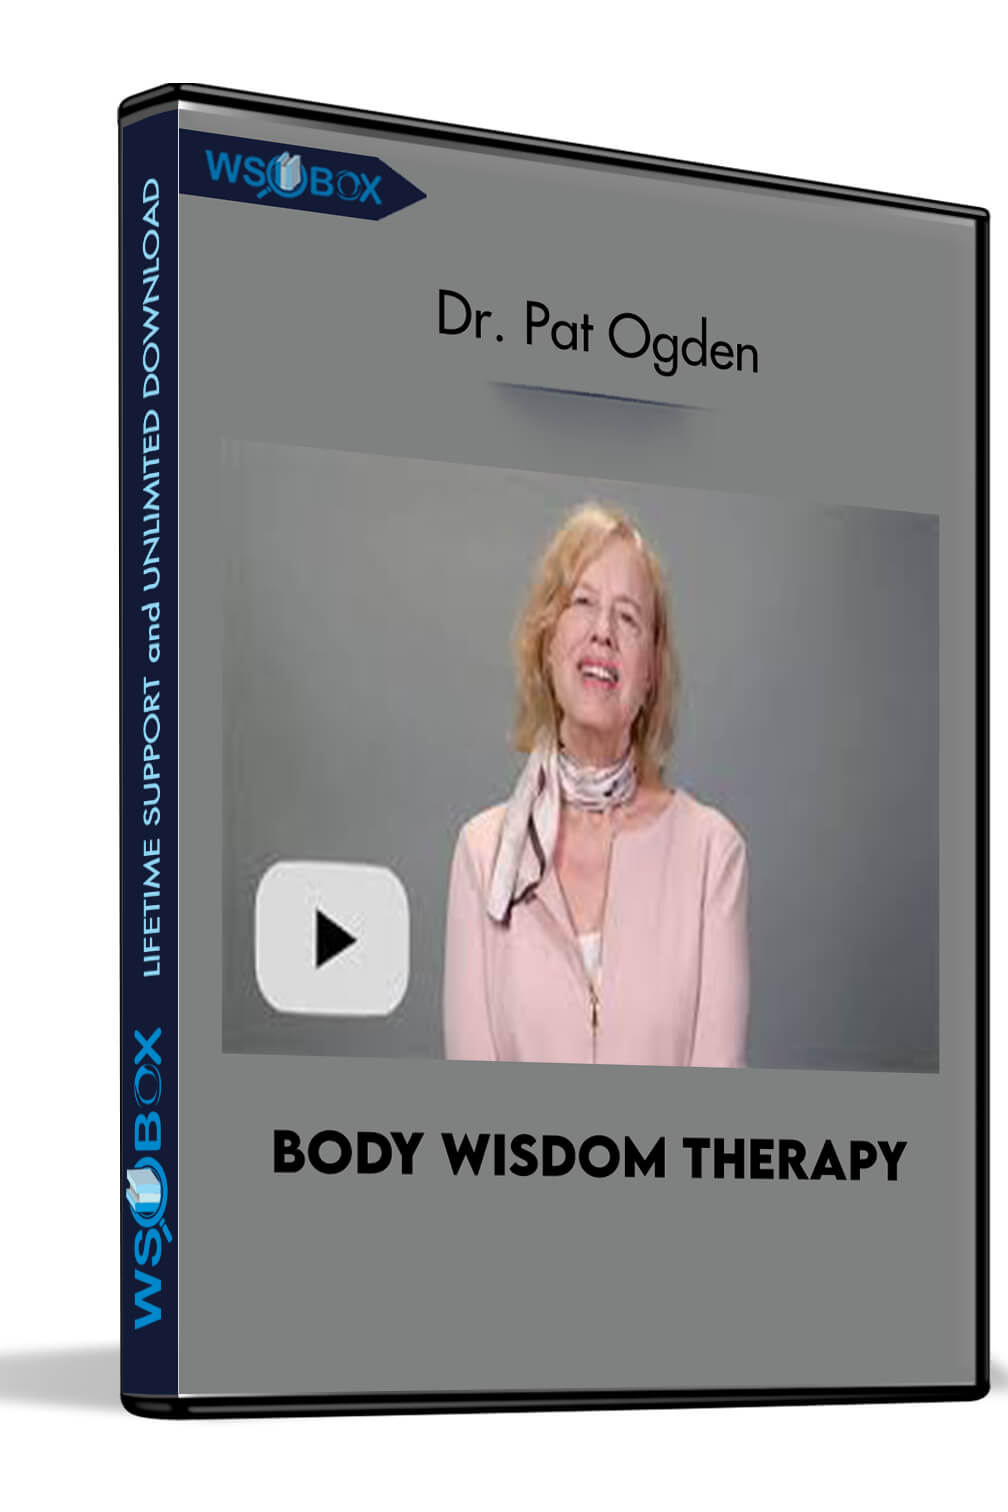 Body Wisdom Therapy - Dr. Pat Ogden